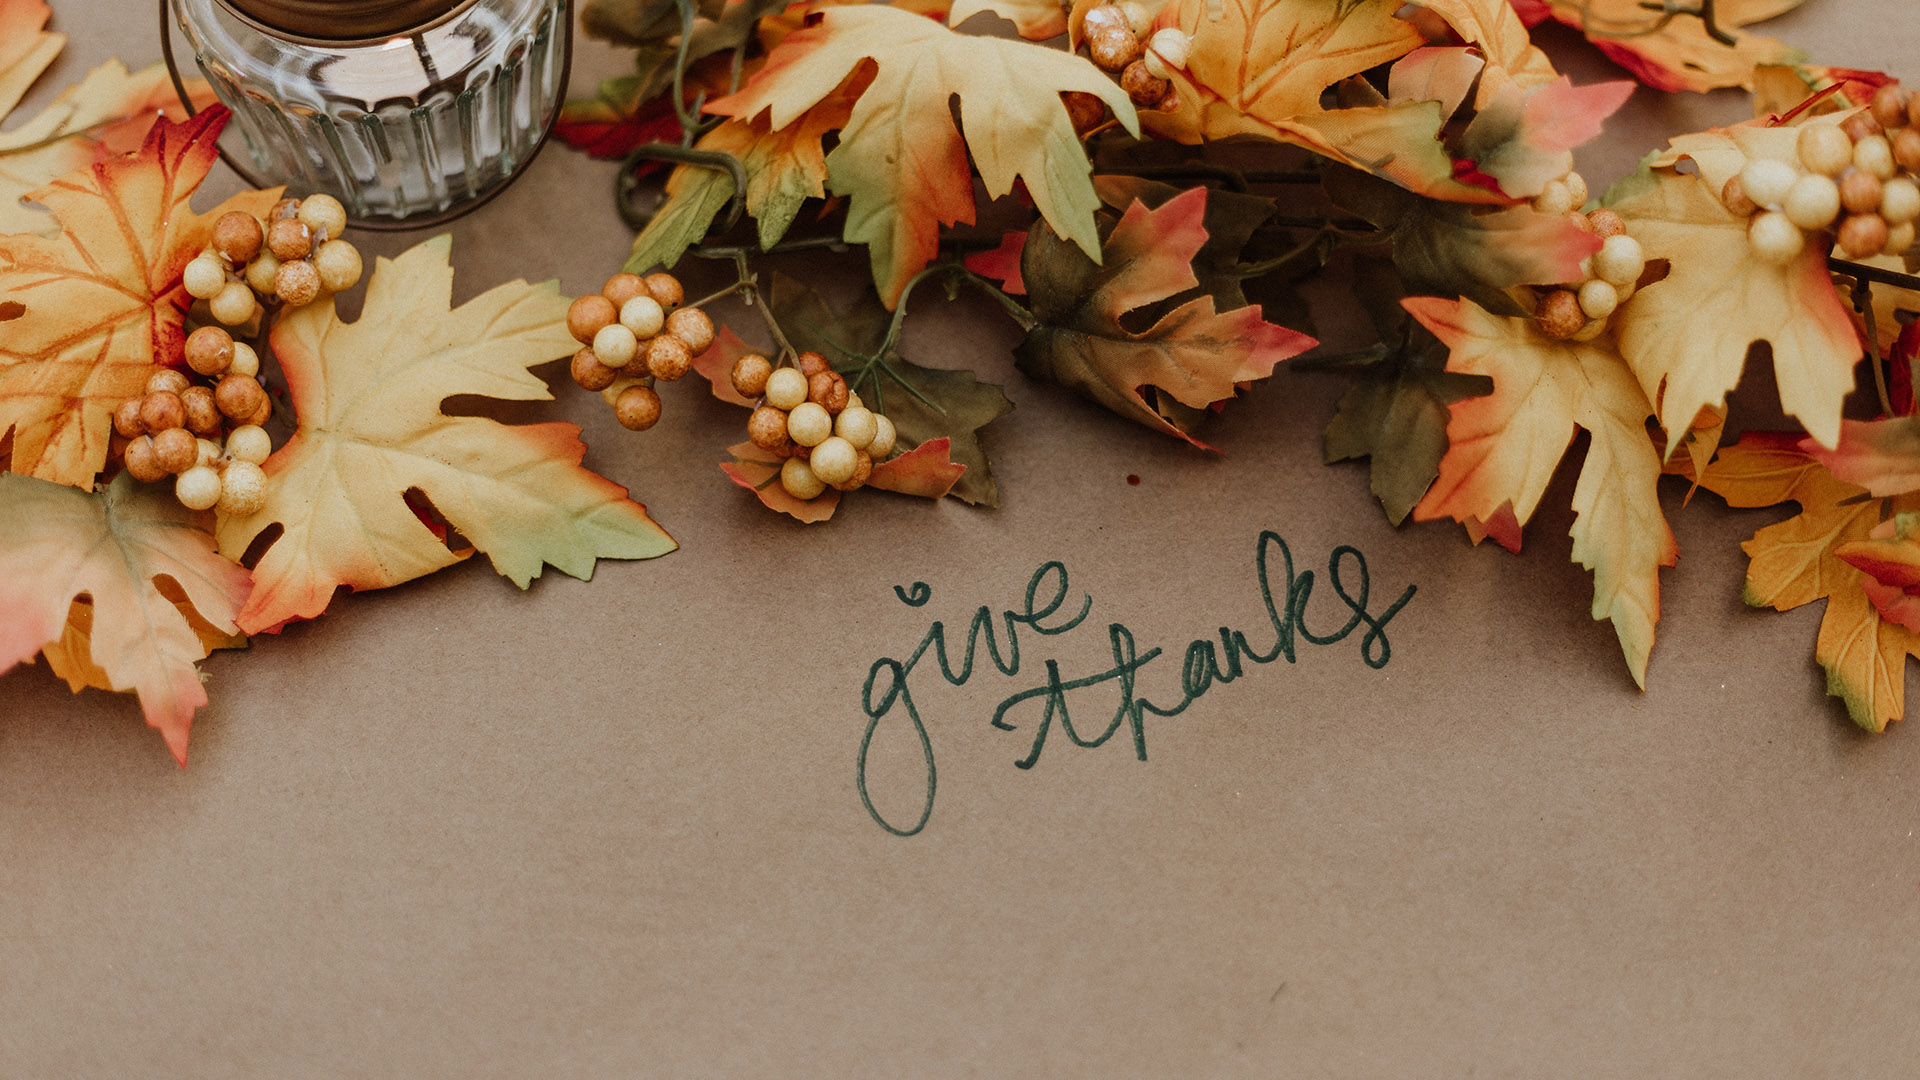 Giving Thanks. Why Gratitude Matters.